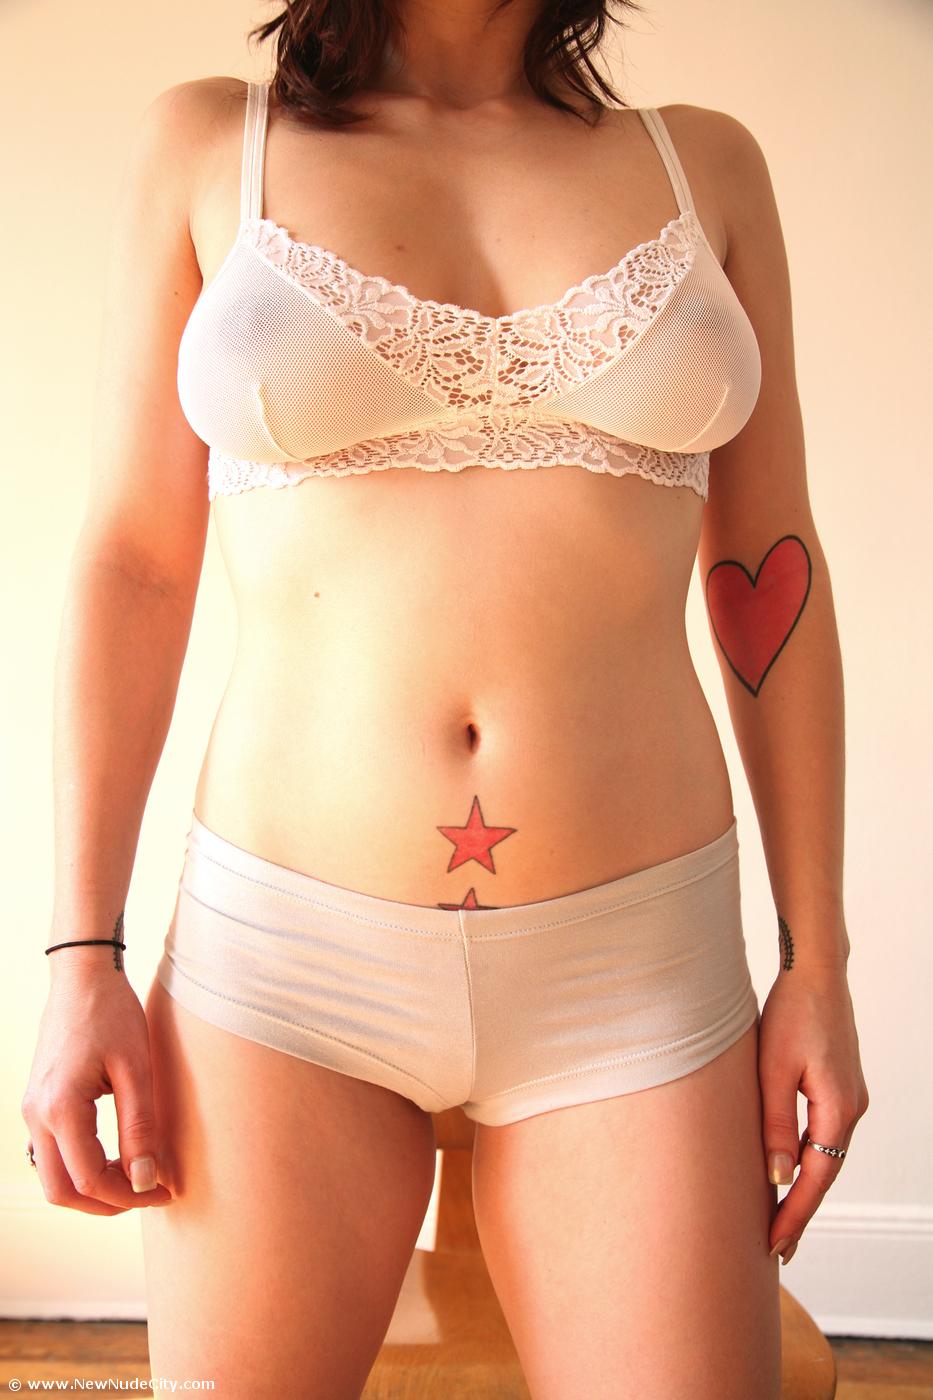 Teen shows off tight white panties